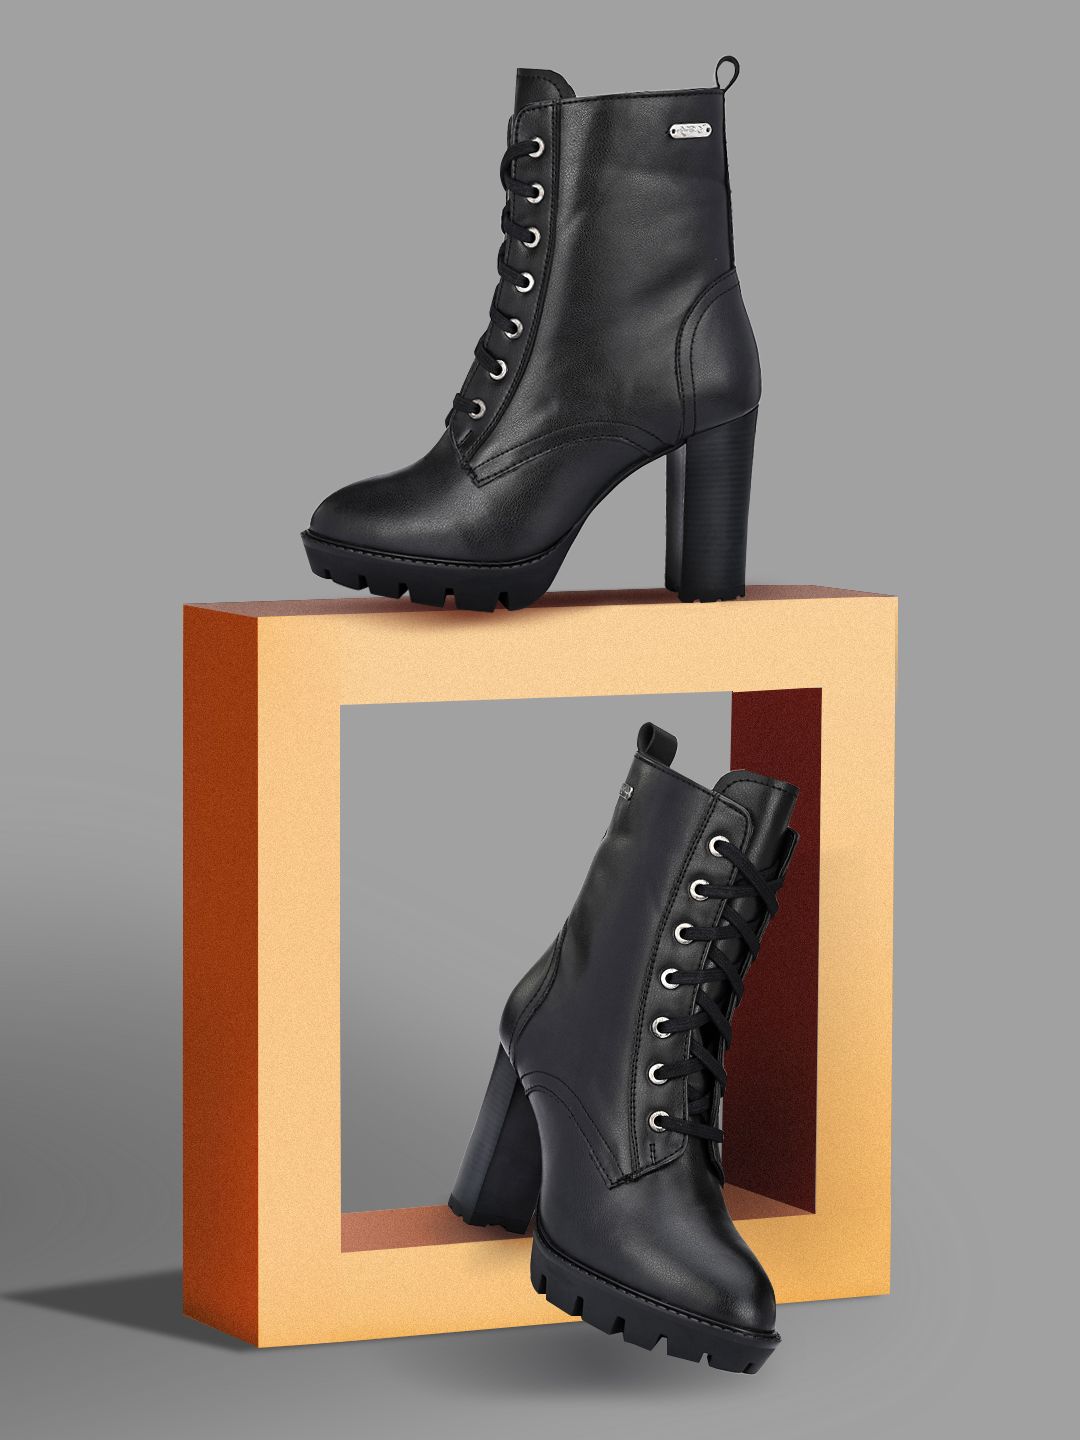 Delize Black Party High-Top Platform Heeled Boots Price in India